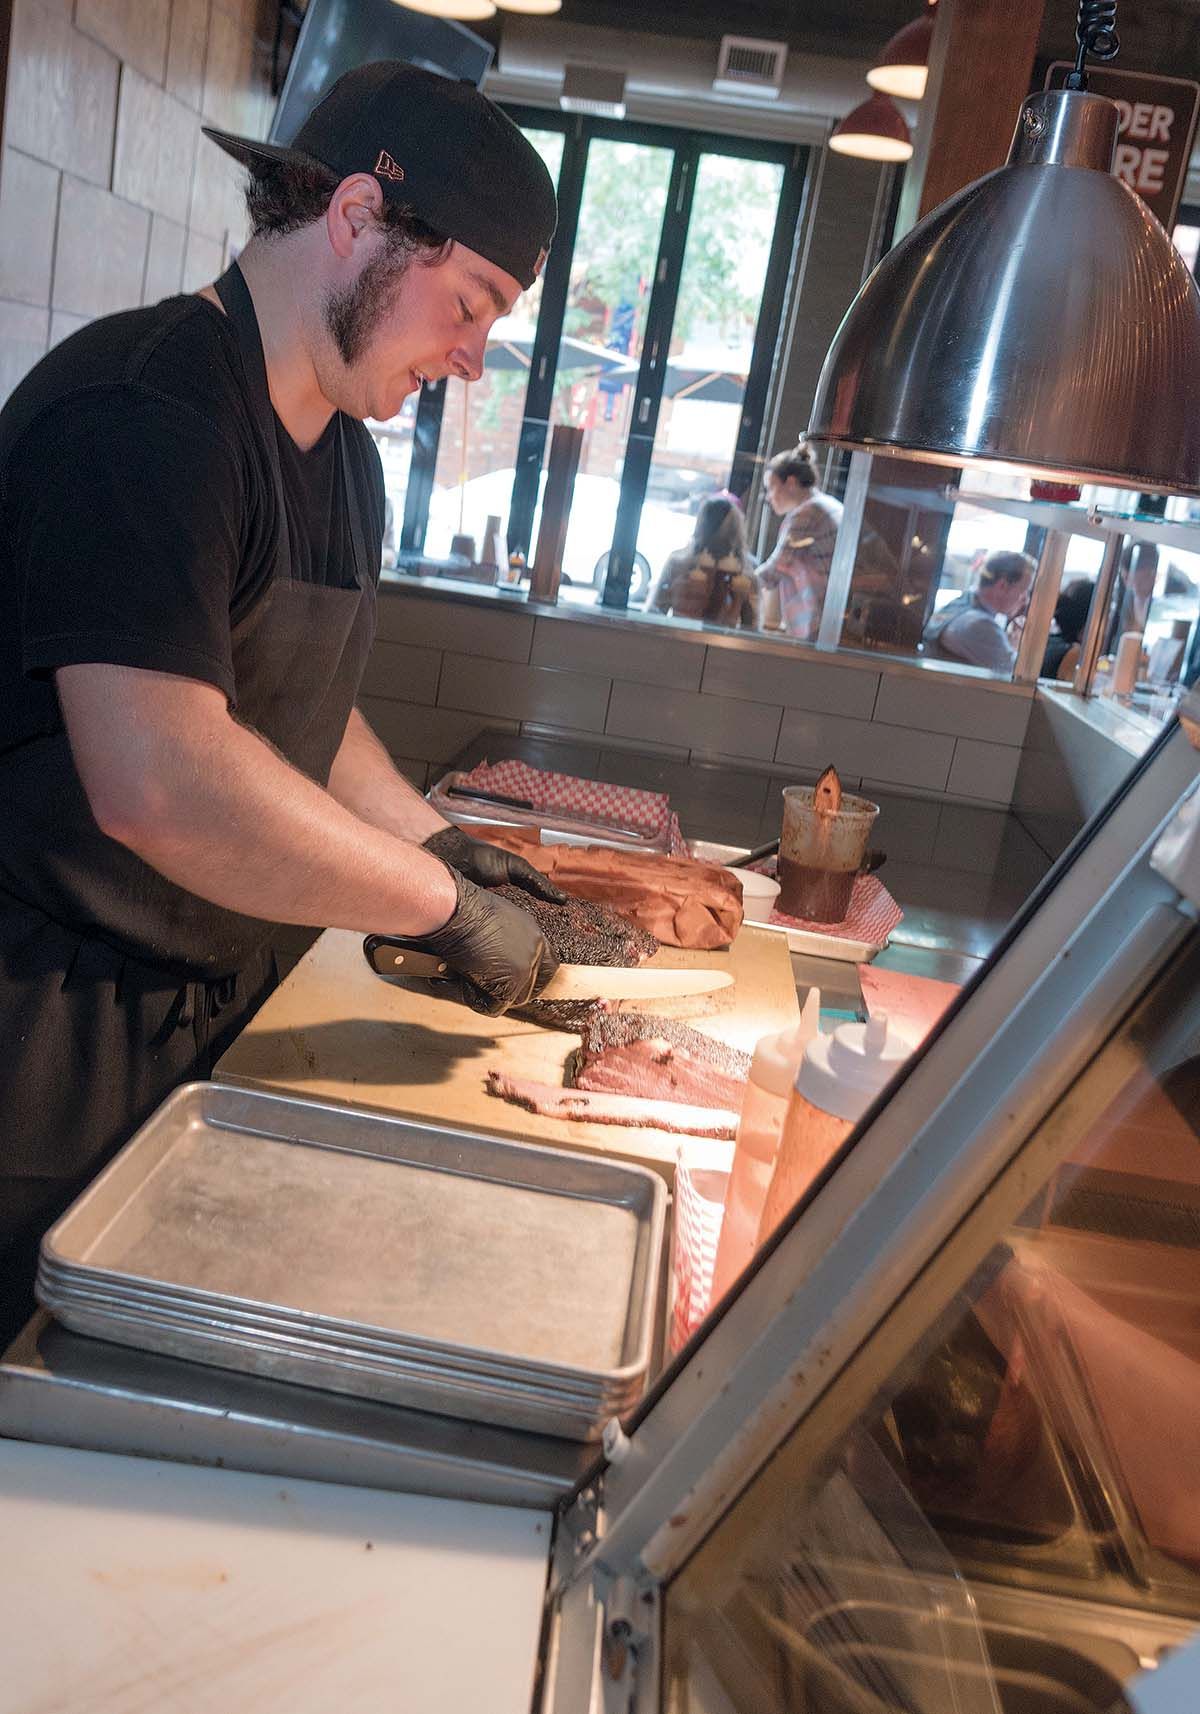 SLOW-COOKED: Sous-chef Nate Brothers cuts a freshly smoked brisket for customers at Durk’s Bar-B-Q, a new restaurant serving slow-cooked meat, such as brisket and pork belly, in Providence. / PBN PHOTO/ MICHAEL SALERNO